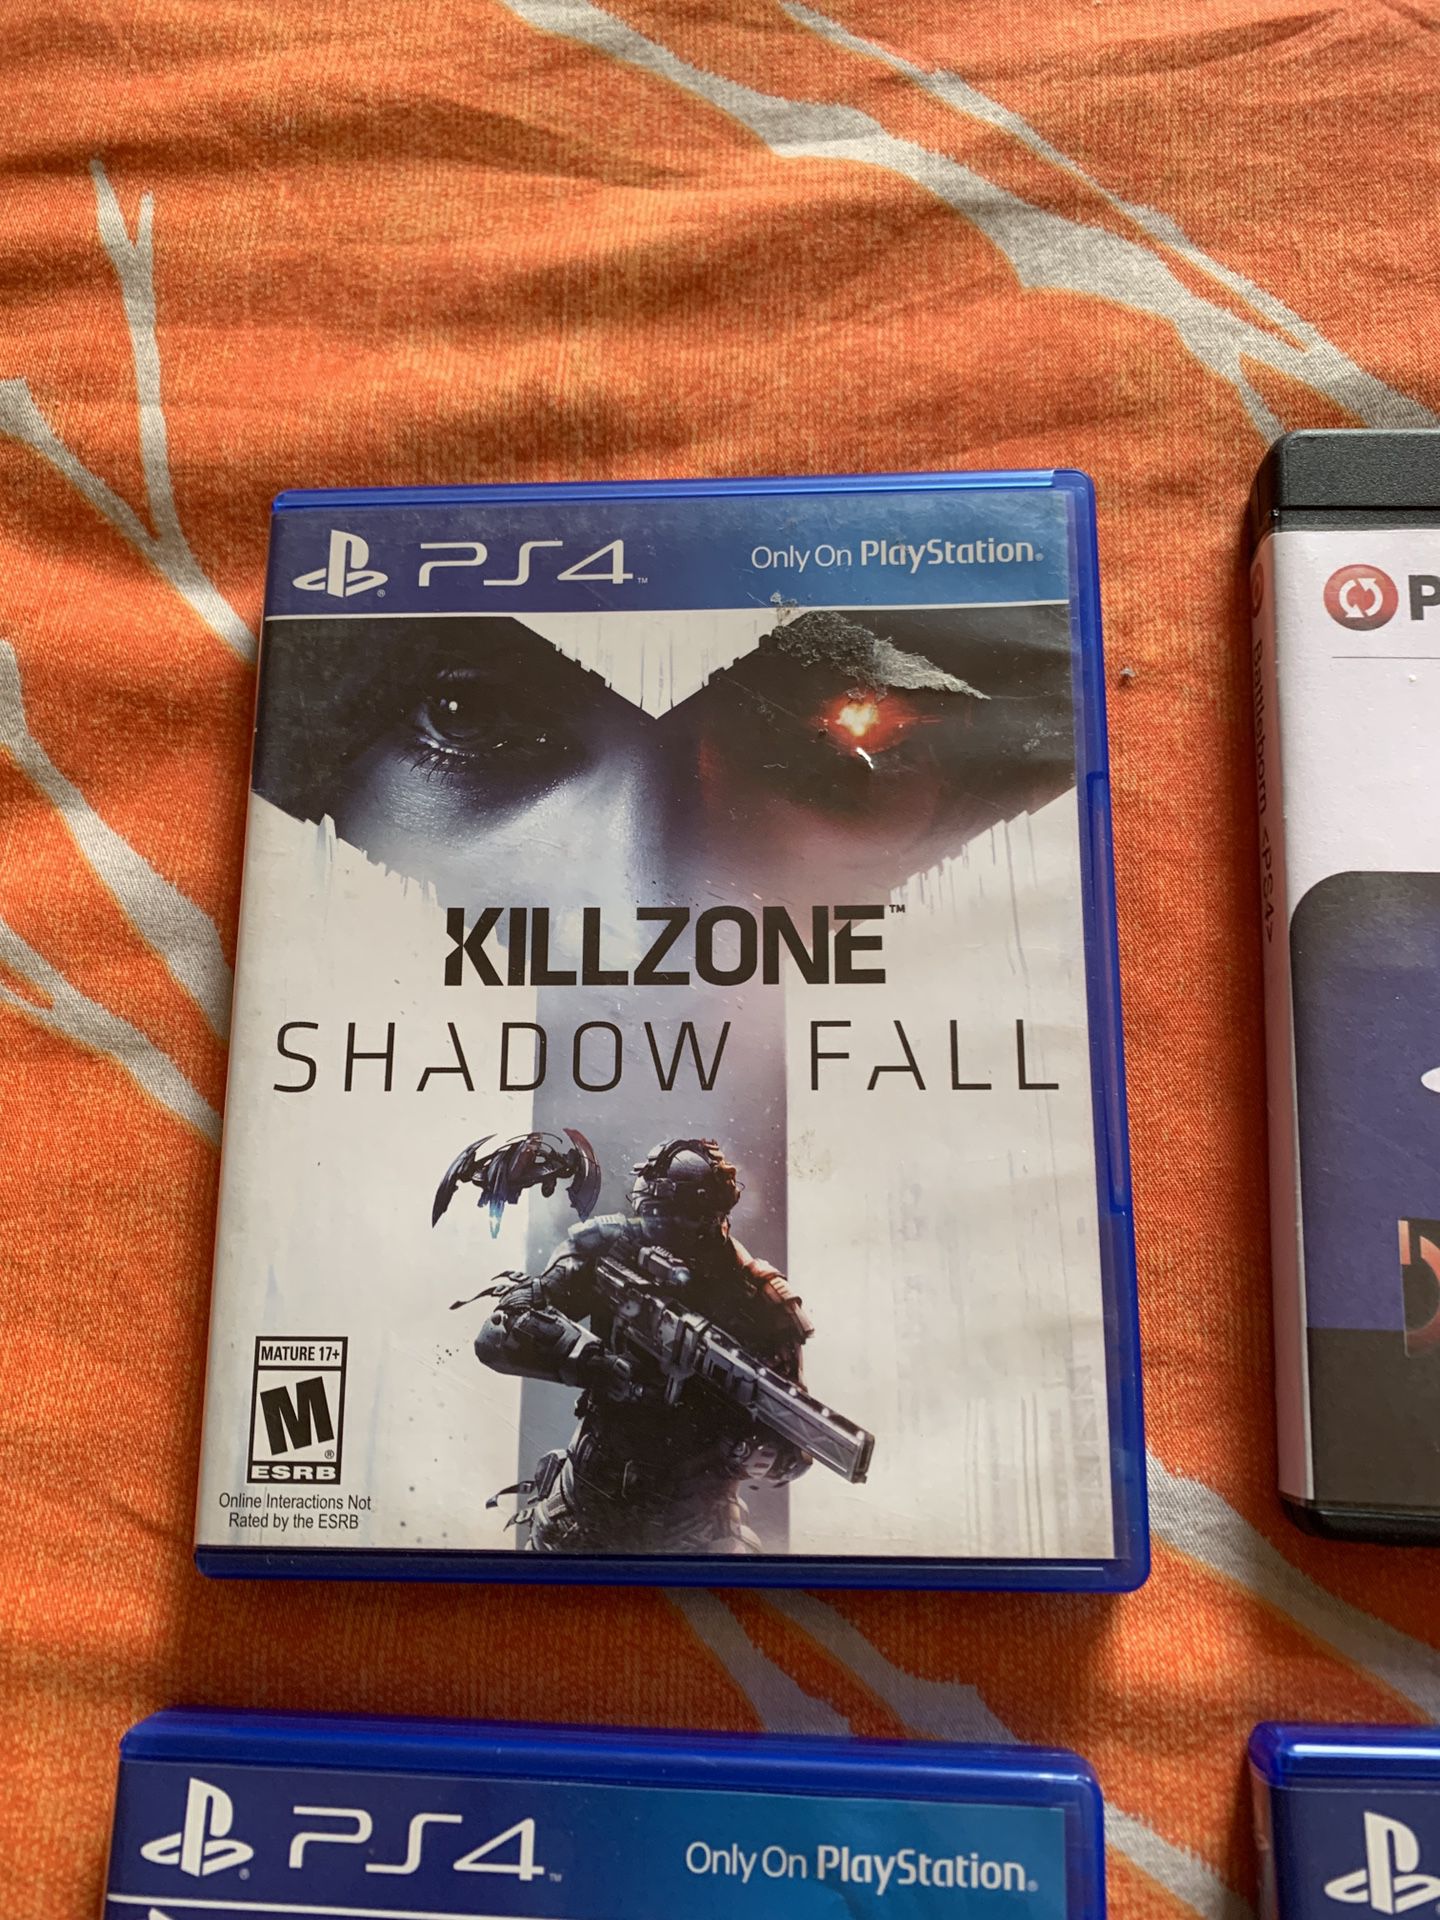 PS4 Killzone: Shadow Fall For PlayStation 4 PS4 Kill Zone : Disc only